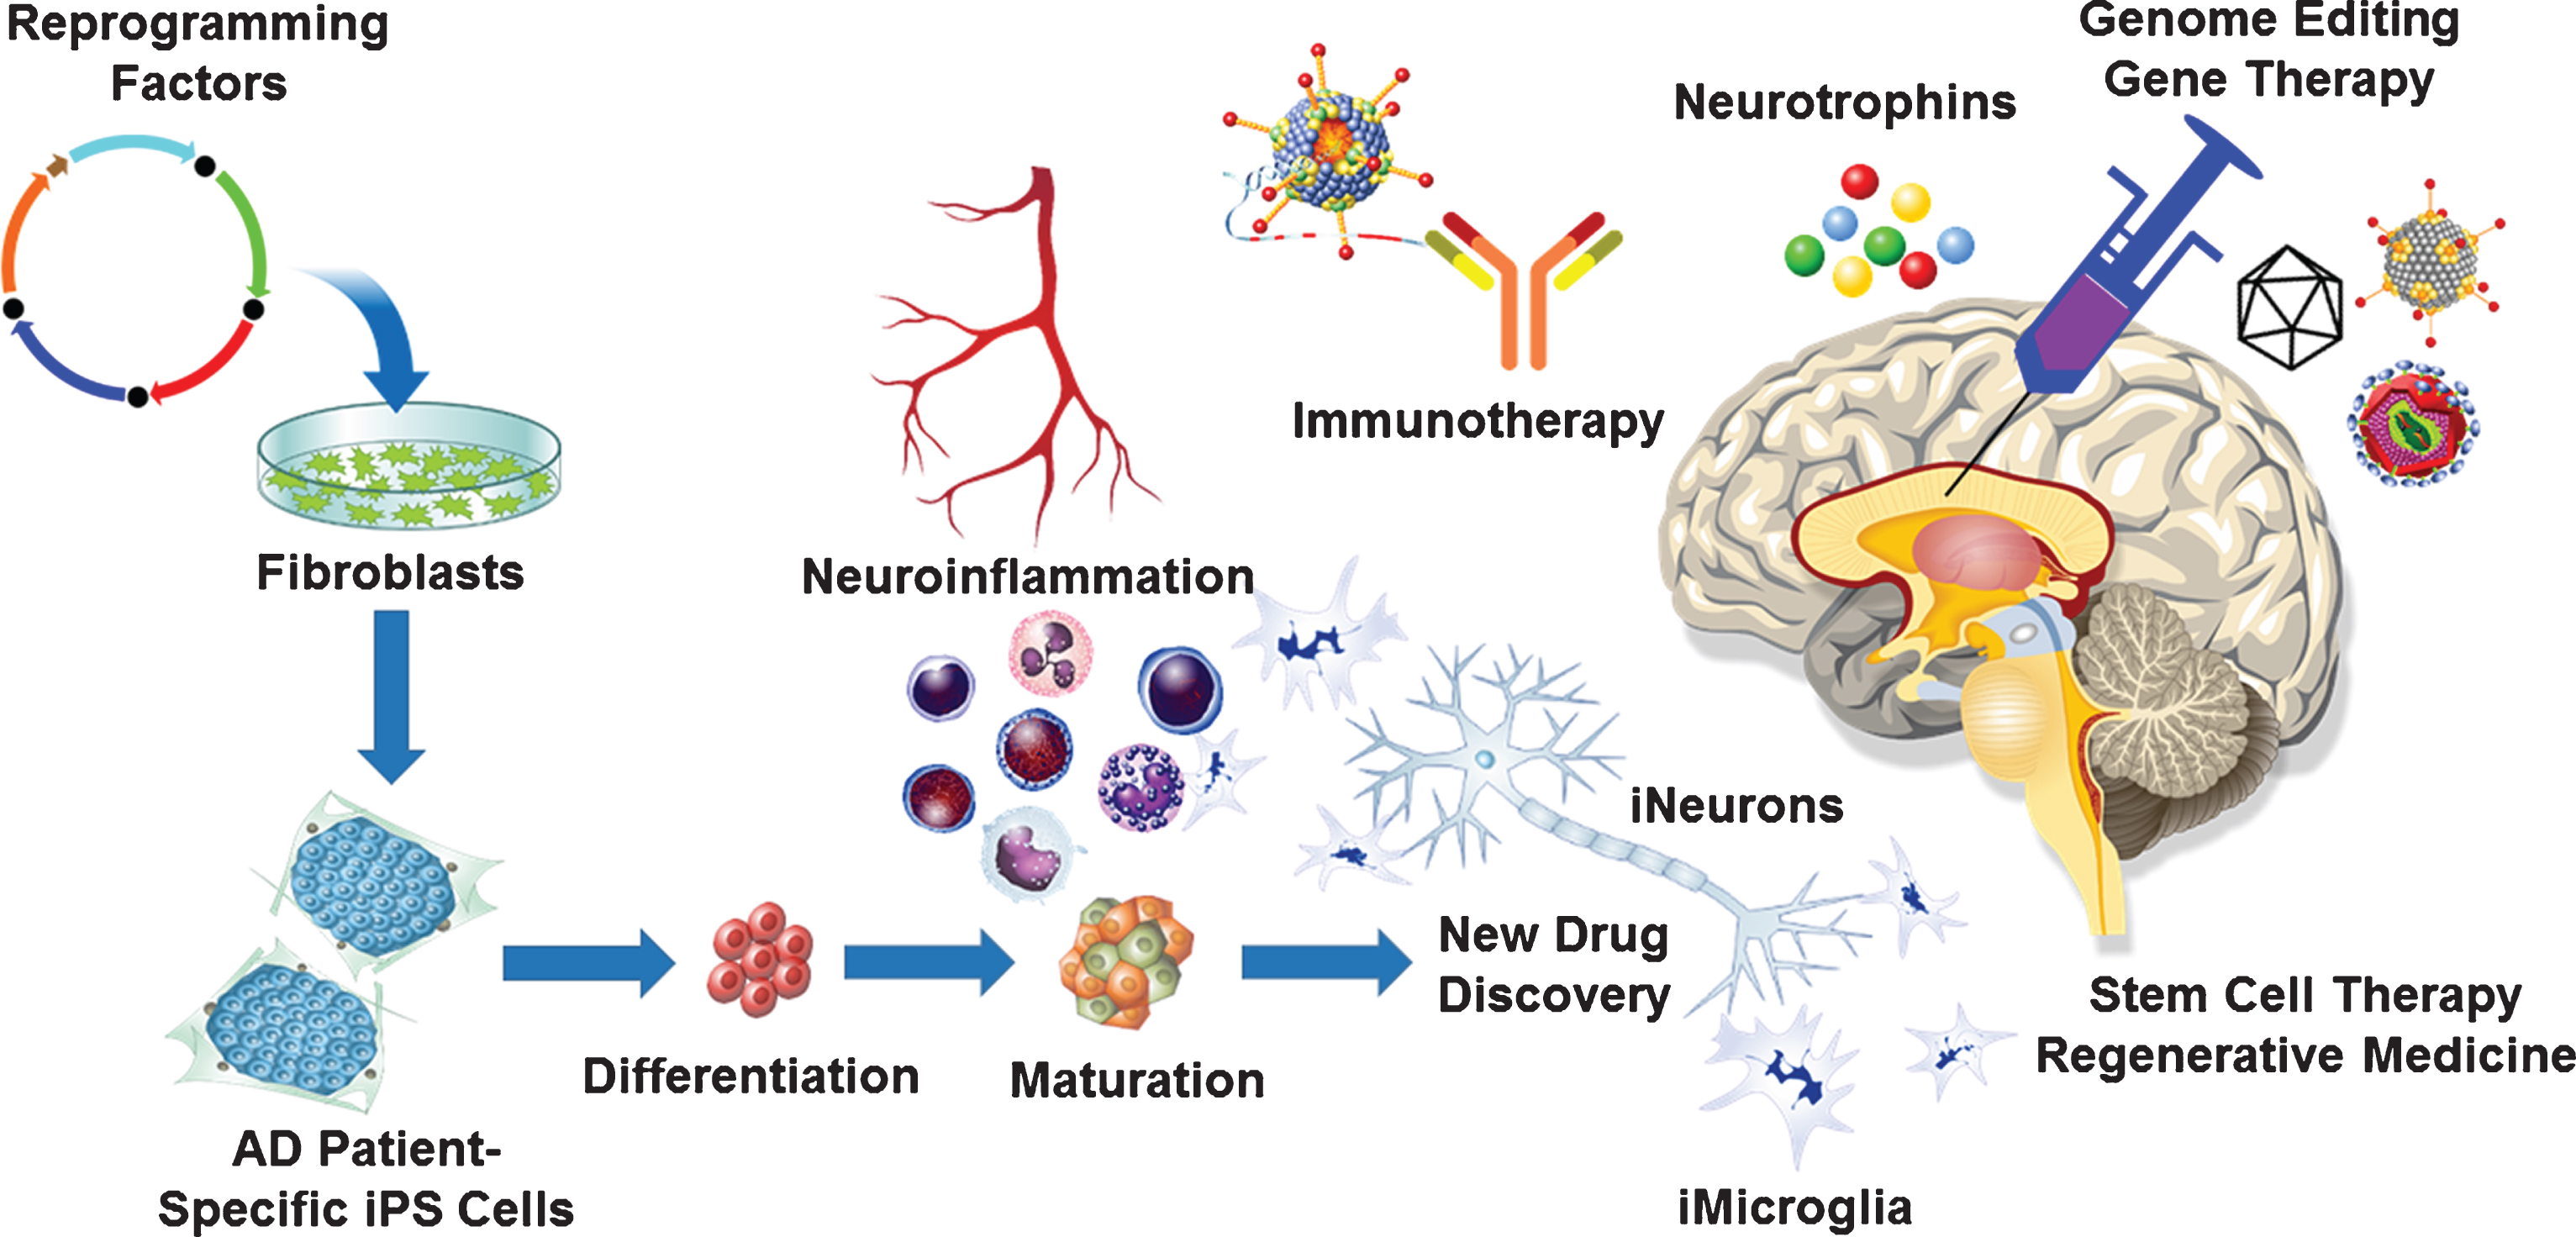 Neuro-immuno-genome-editing-stem-cell-therapy for Alzheimer’s disease (AD). Development of novel AD therapies would involve harnessing the latest technological advancements in the fields of neurology, immunology, molecular biology, virology, molecular medicine as well as stem cell biology. Neuroinflammation plays a significant role in the development and progression of AD. Targeting neuroinflammation using CRISPR/Cas9-mediated gene editing and gene therapy approaches will delay the onset as well as potentially halt the progression of AD. Genetically engineered recombinant viral vectors with enhanced neurotropism due to novel capsid engineering will maximize targeted gene editing and gene therapy efficacy. Latest advancements in the field of stem cell biology and regenerative medicine will enable the development of disease in a dish model using AD patient derived iPS cells to generate 3D organoids, which can be used for the new drug discovery. Such an approach will lead to the development of AD-patient specific neuro-immuno-genome-editing-stem-cell-therapy.